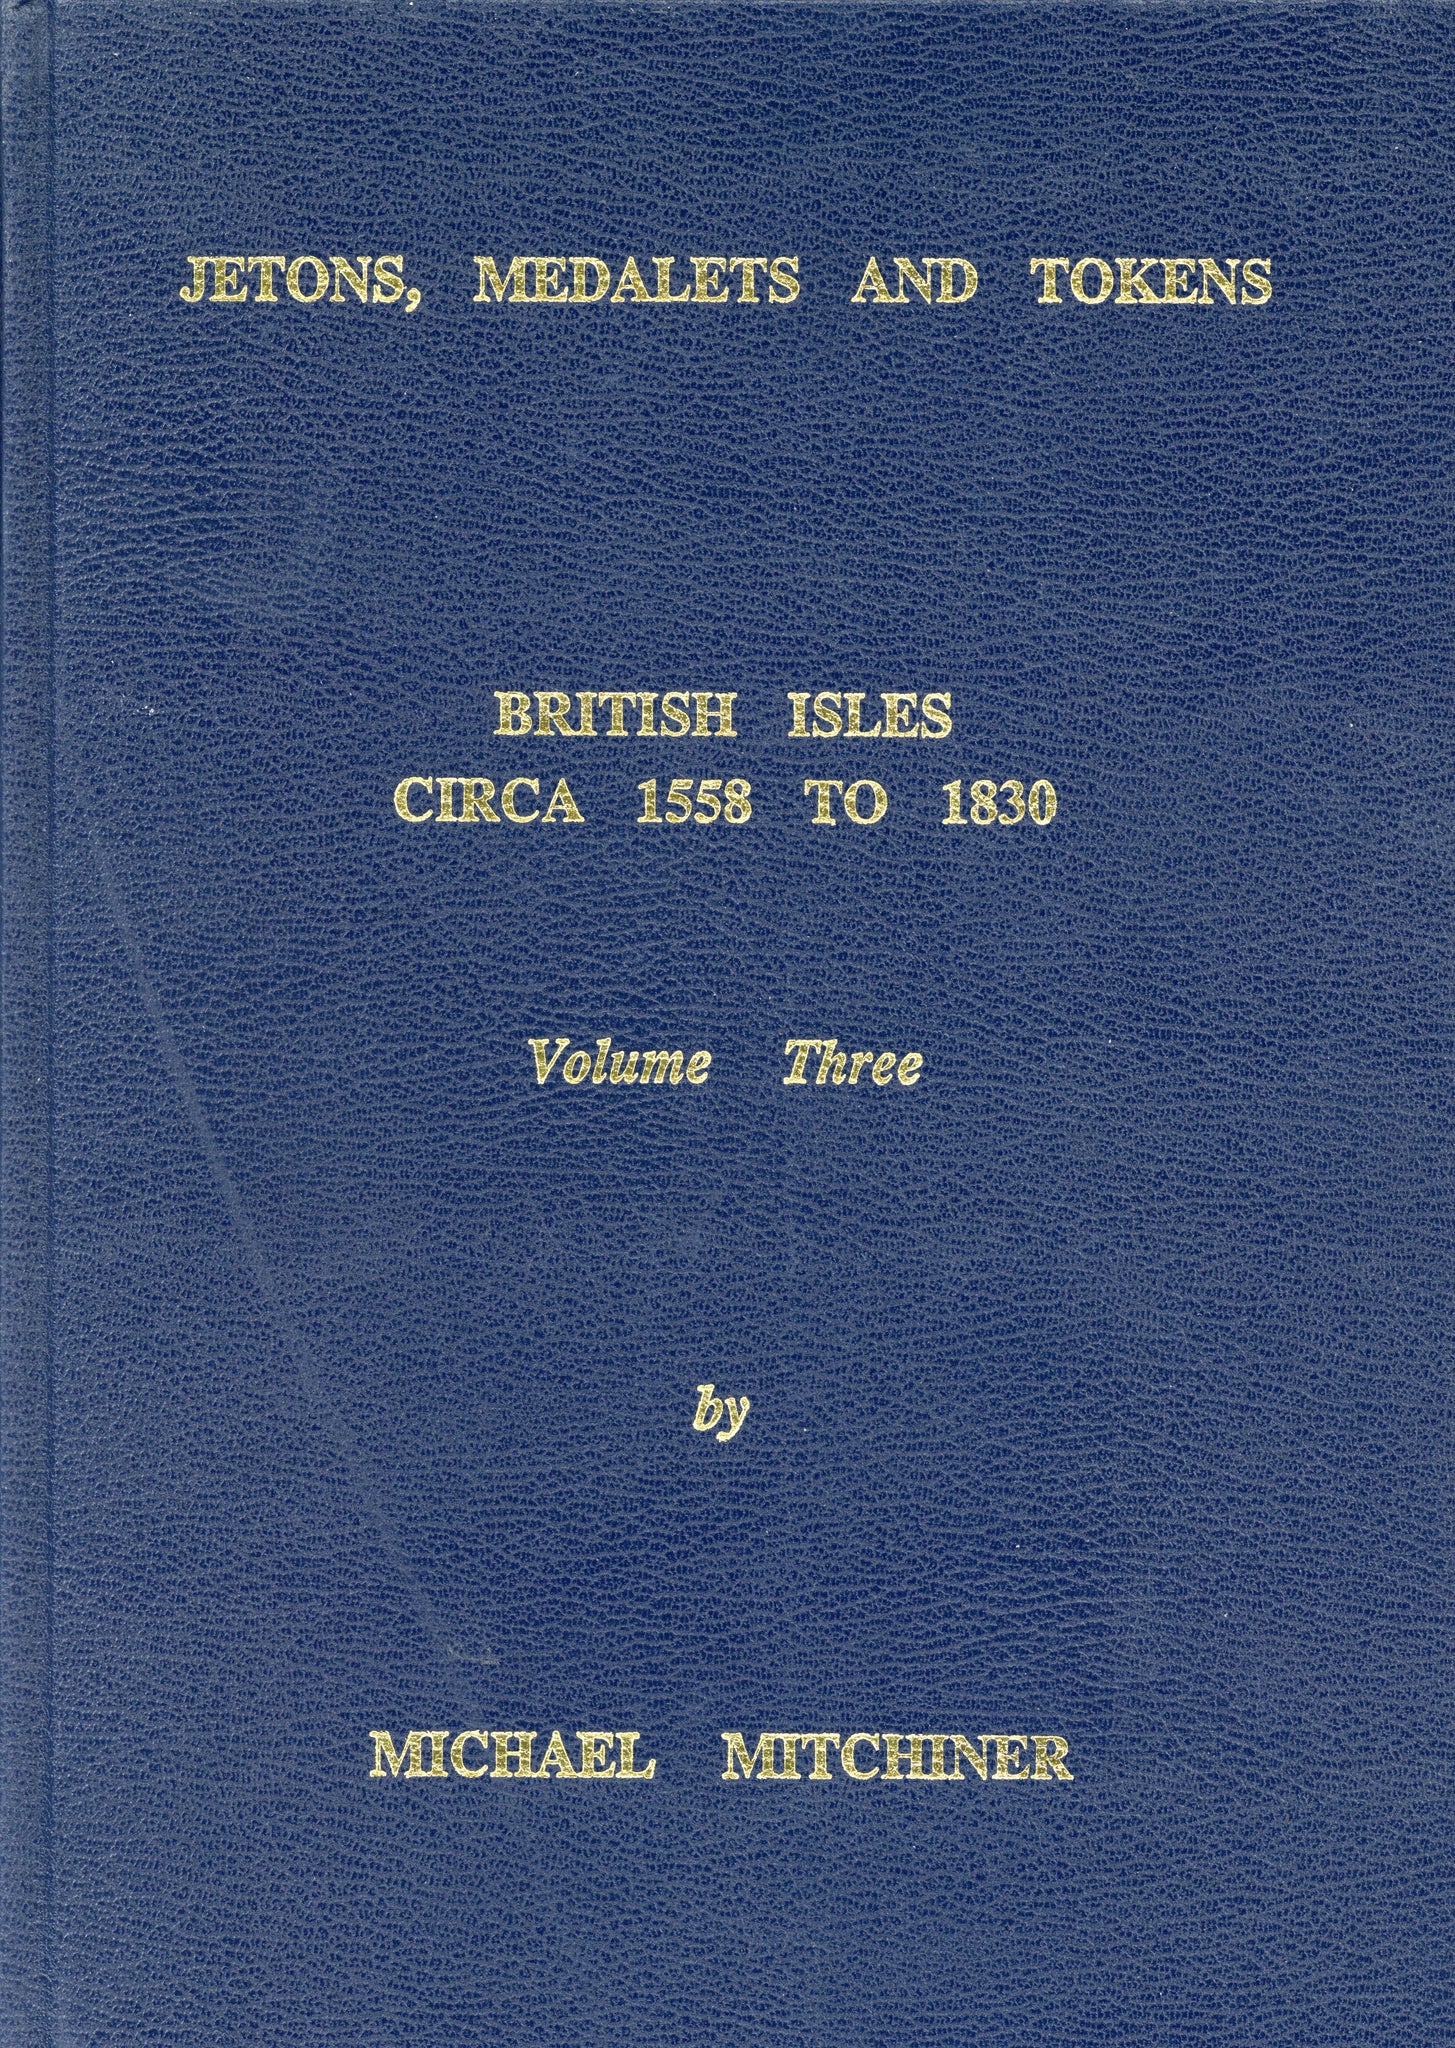 Jetons Medalets and Tokens Vol. 3 - British Isles Circa 1558 to 1830 by Mitchiner, M.